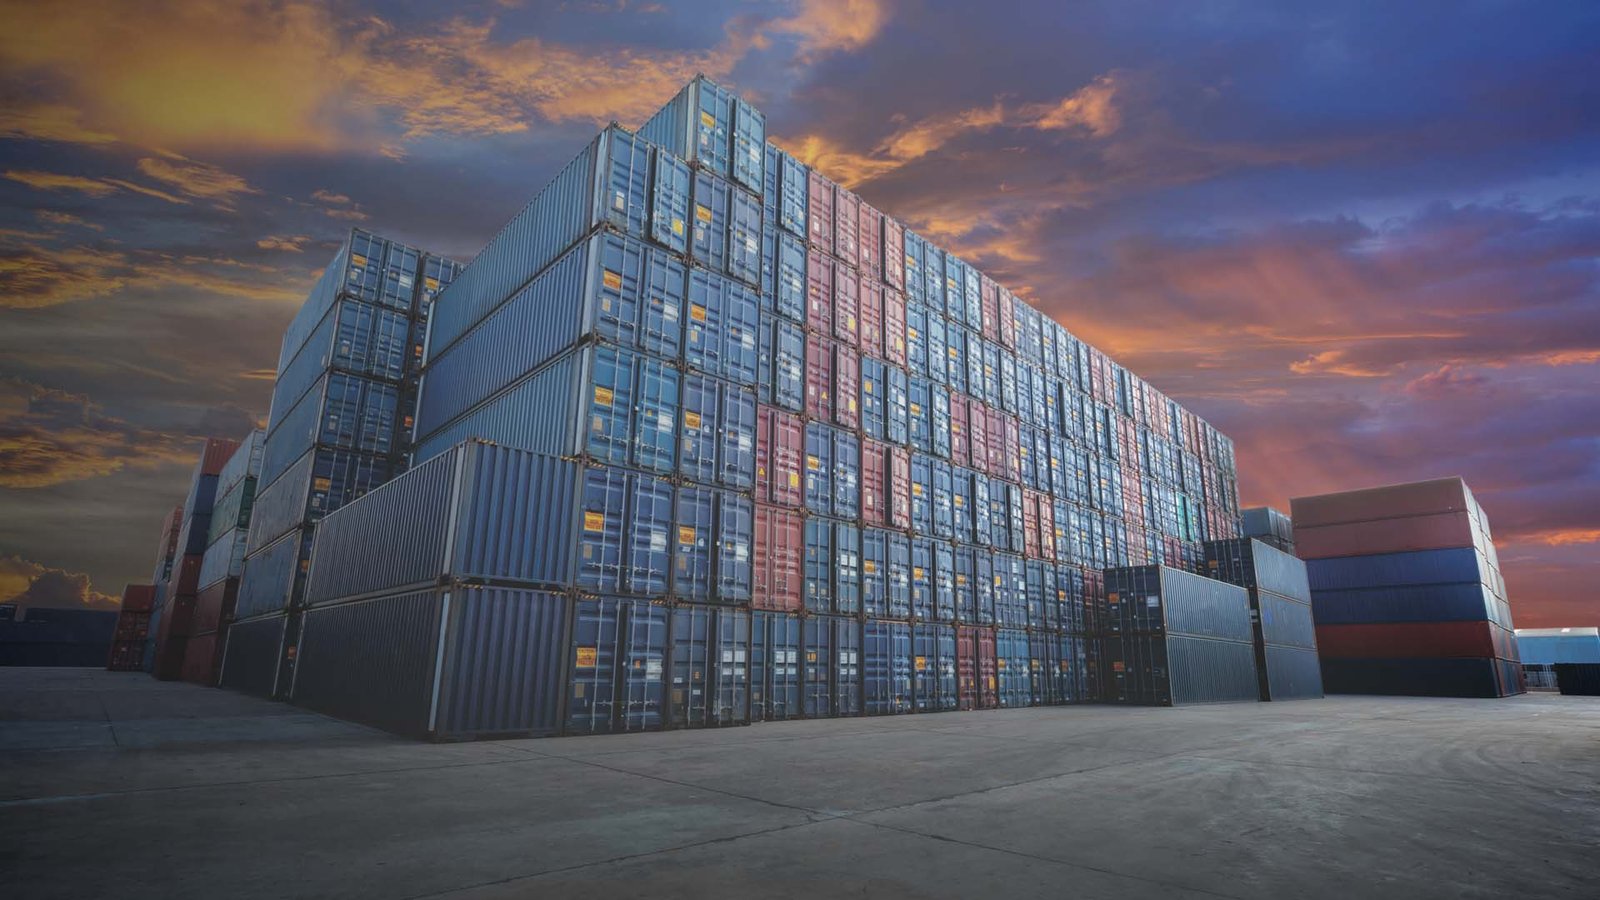 5 Things You Need to Know Before Choosing a Freight Company